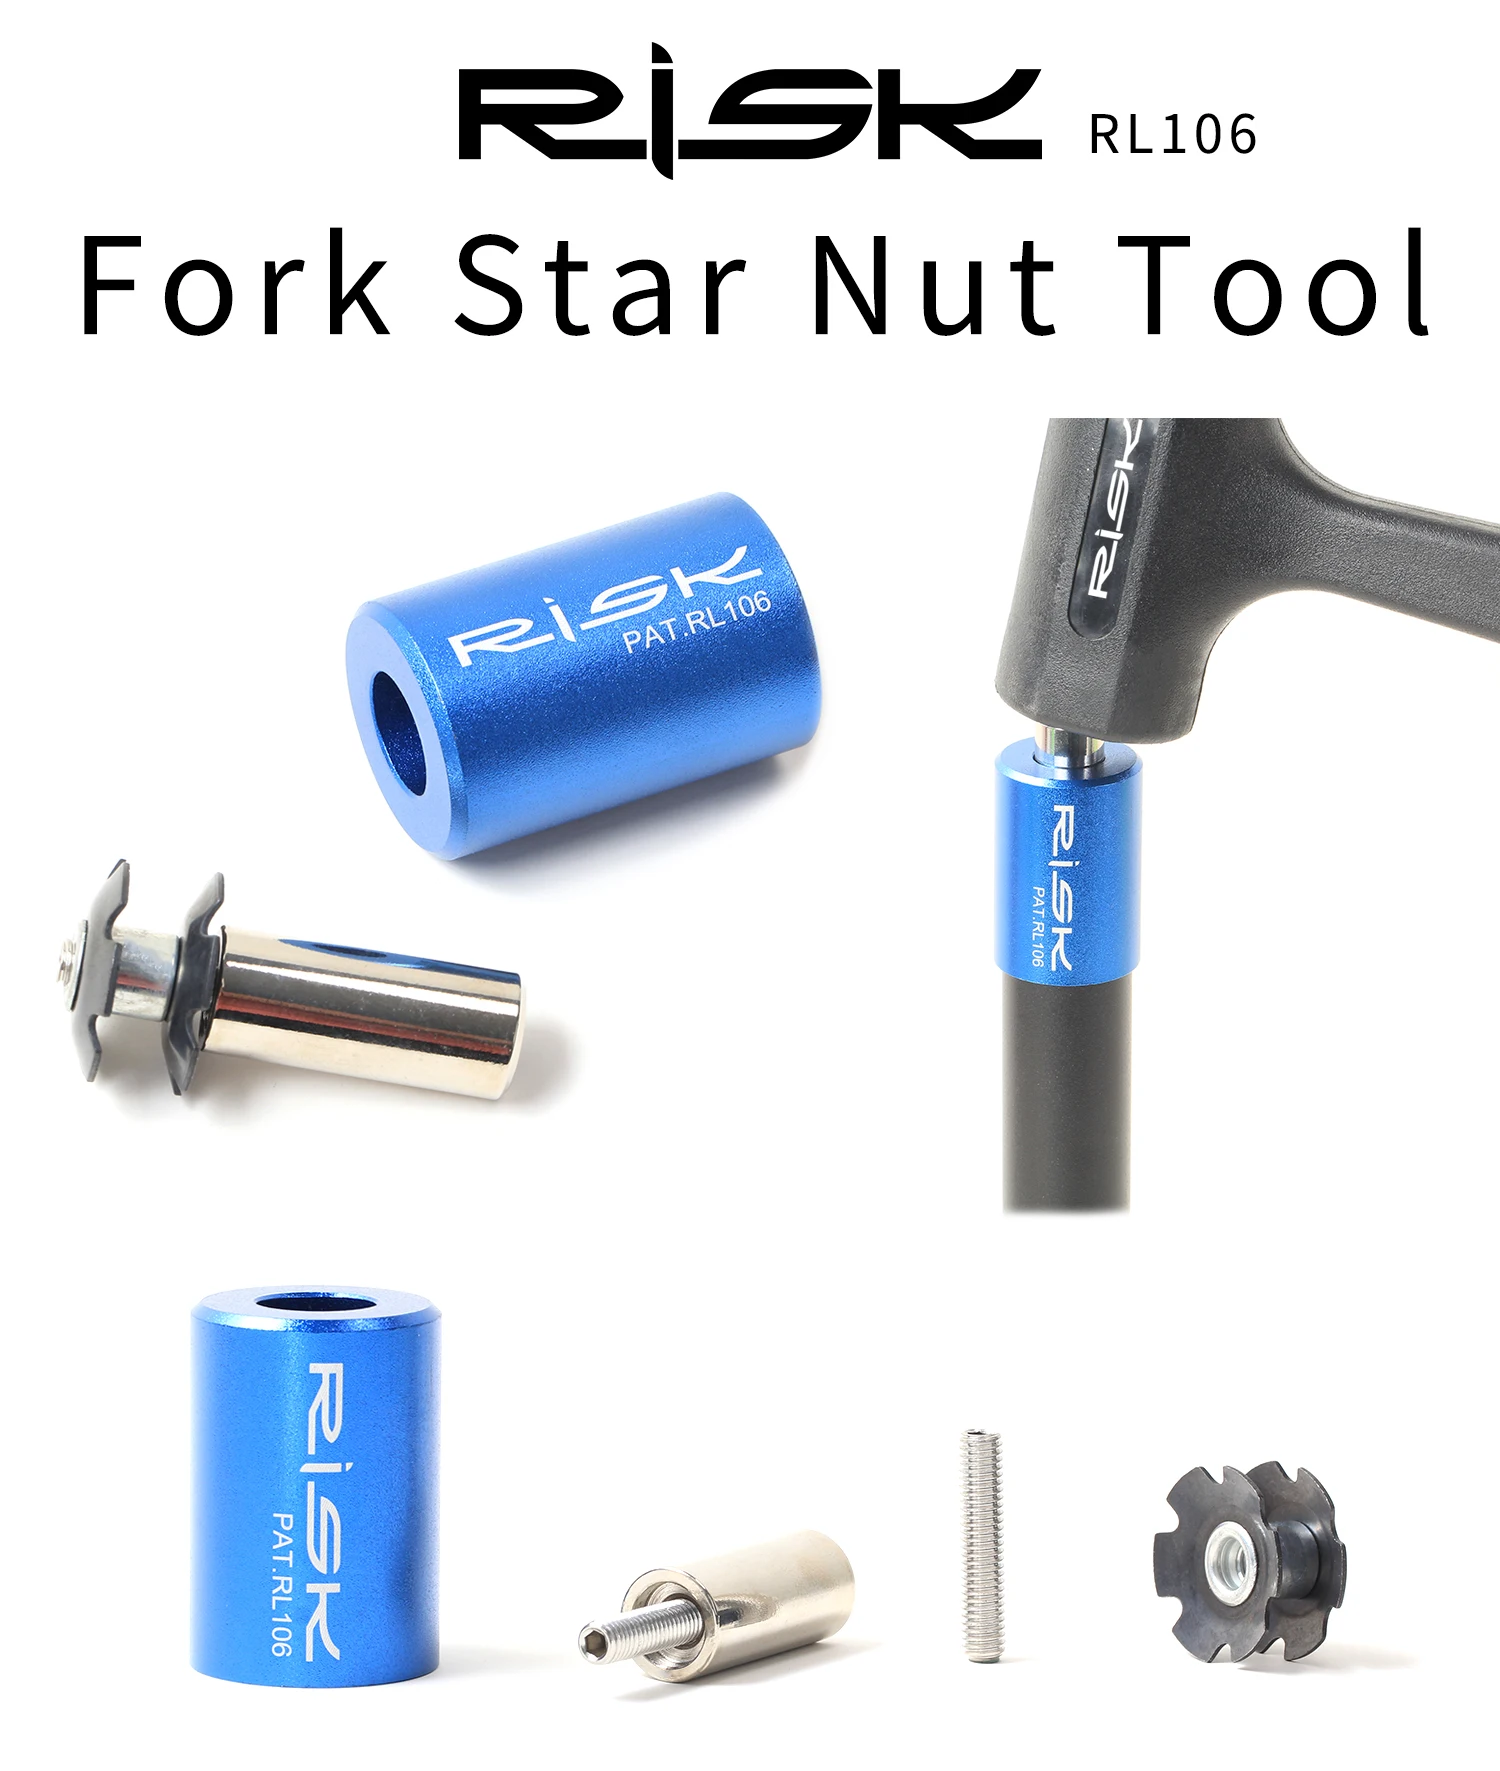 for 7/8,1,1-1/8 AIKESIWAY Bicycle Fork Star Nut Installation Tool Bike,with Free Spare Special Screw and Start Nut 